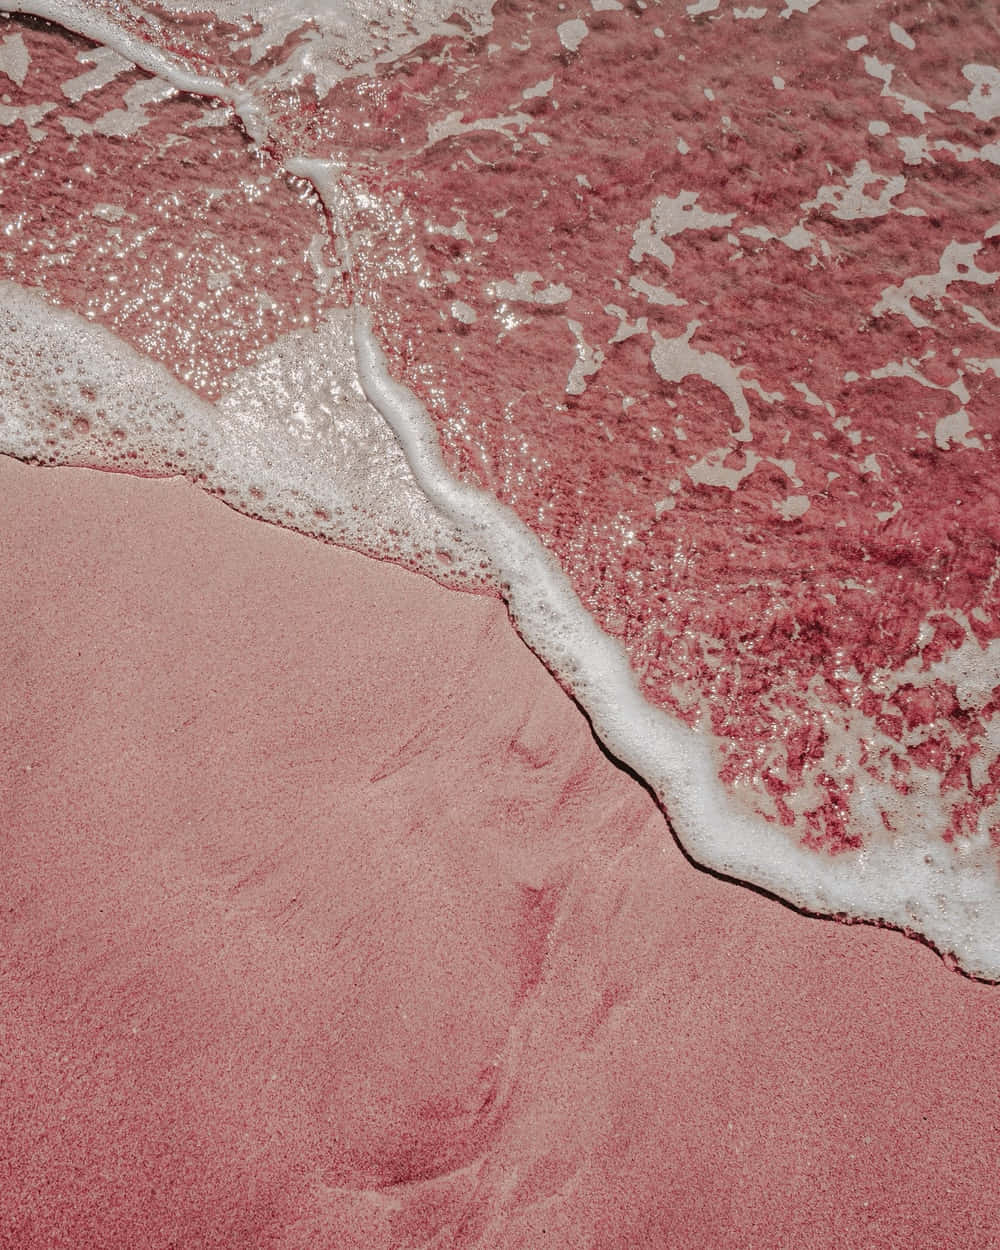 Sea Water On Blush-Colored Sand Background